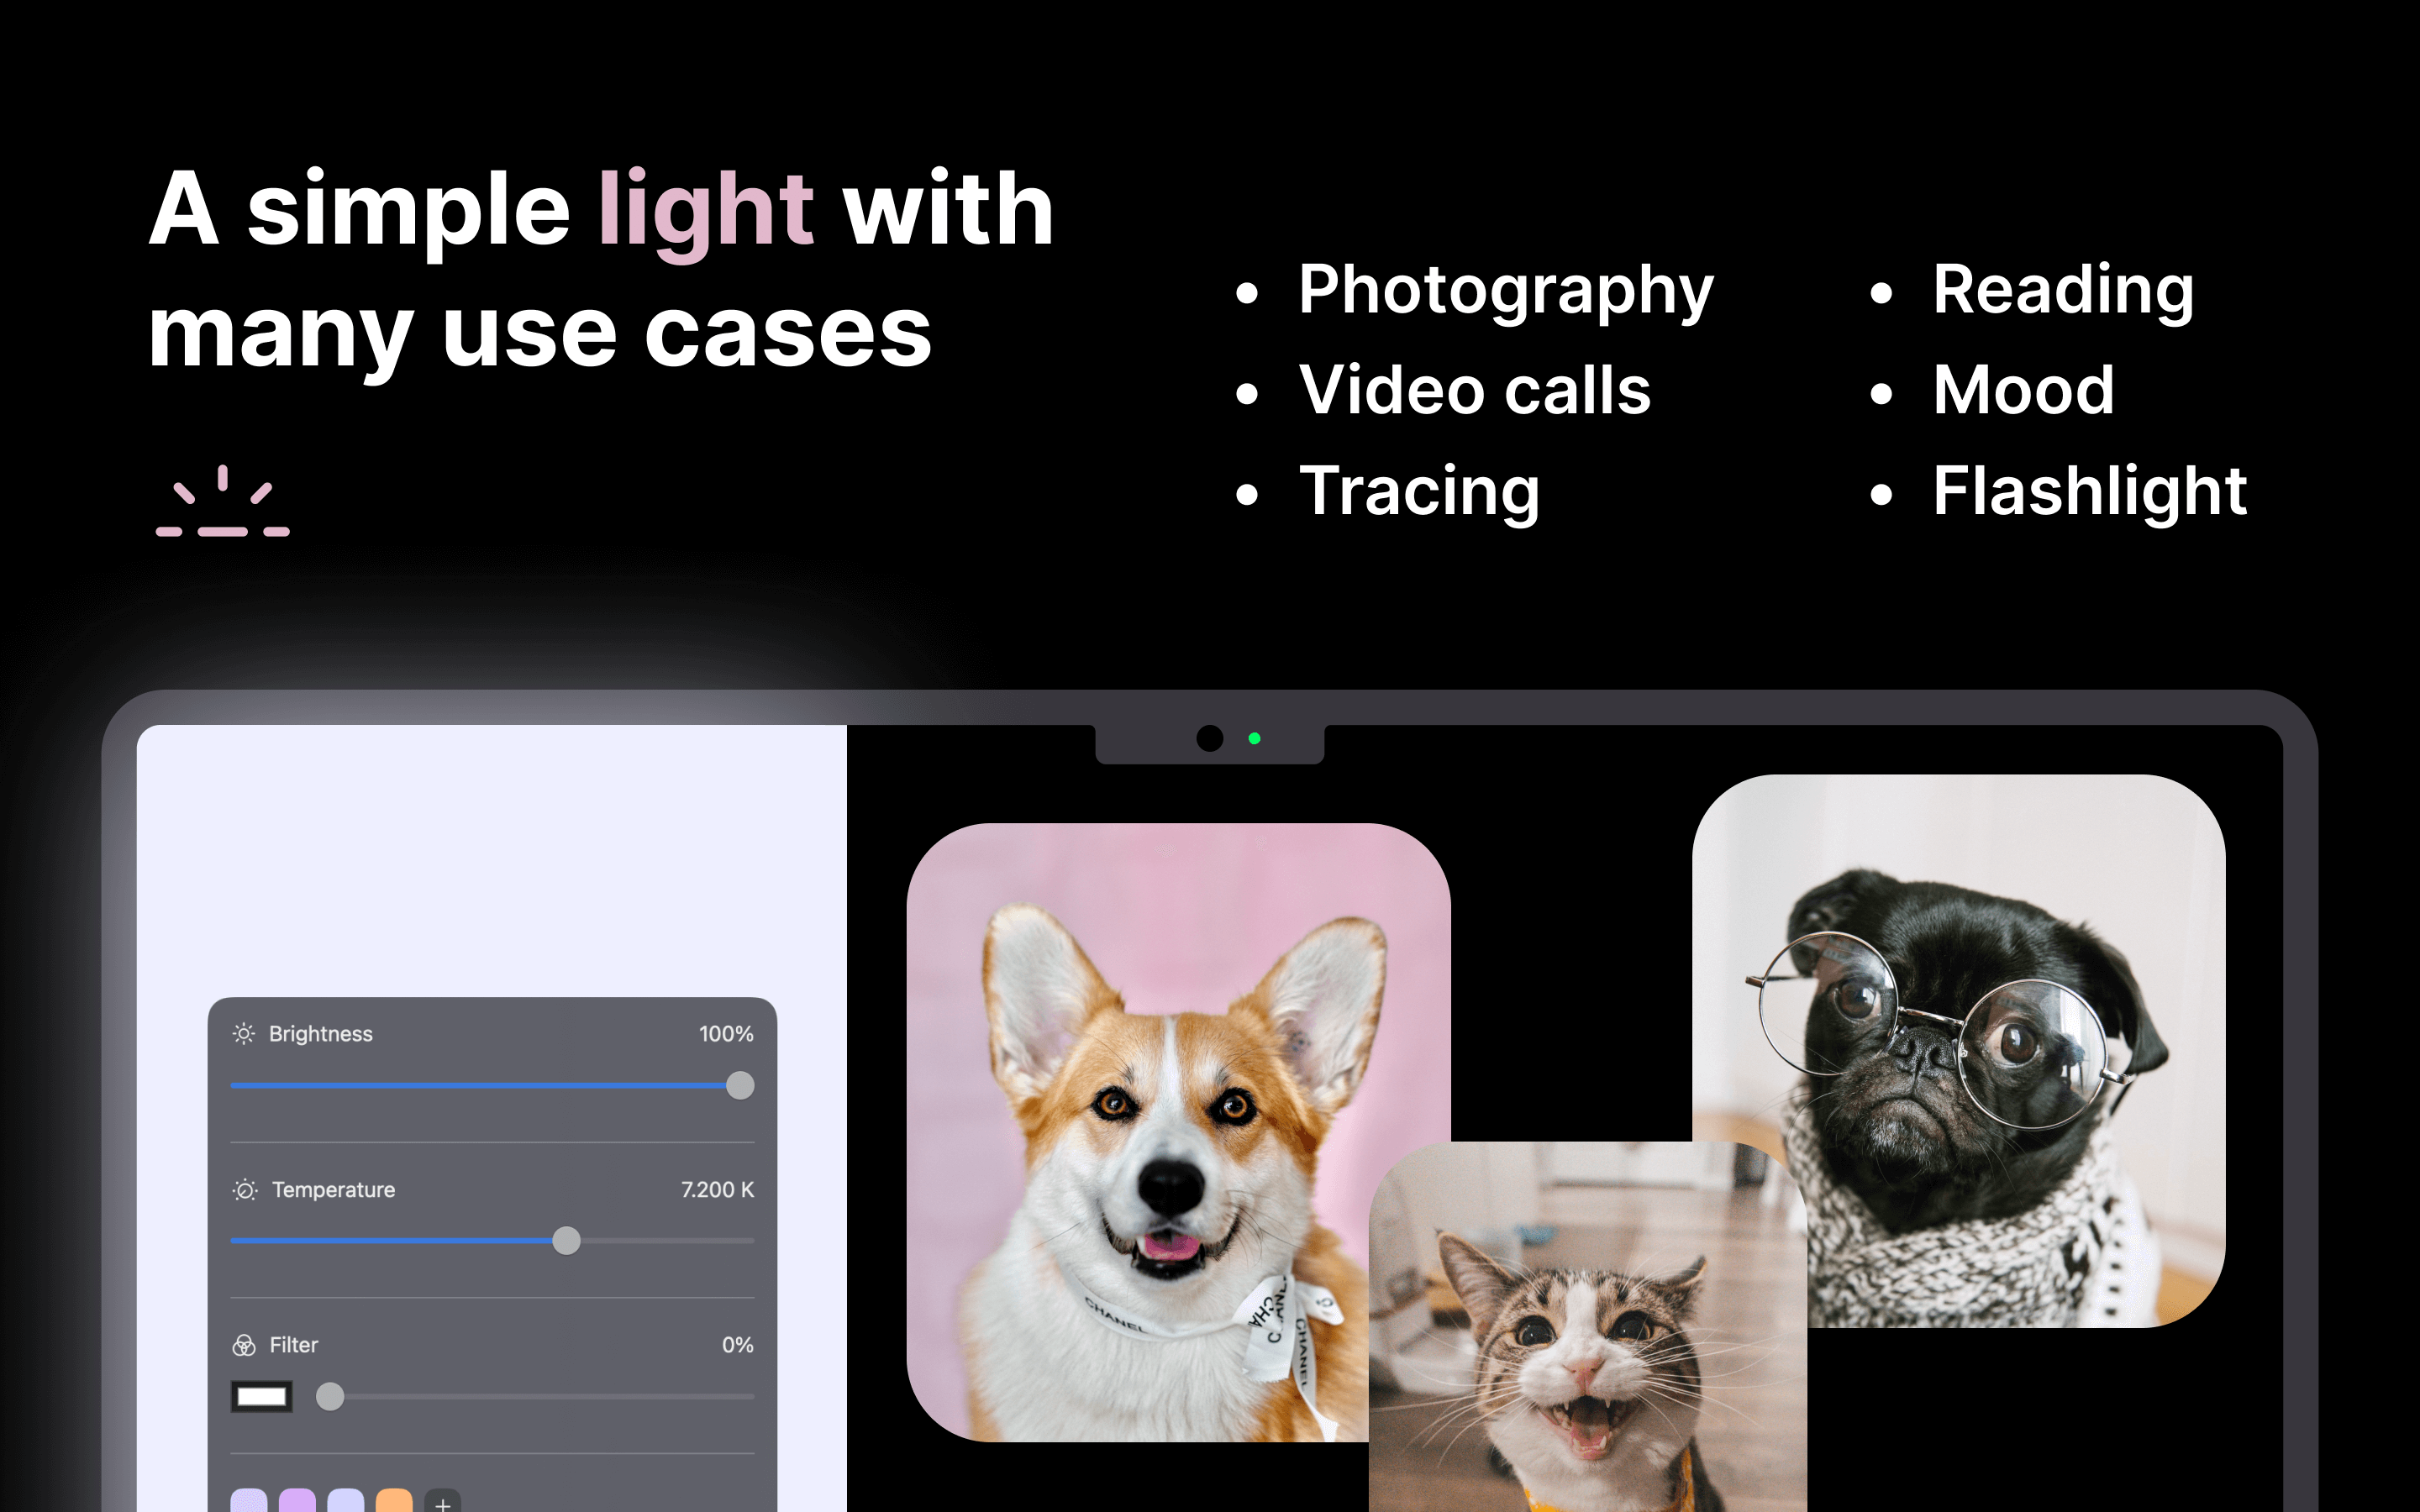 App Store screenshot of Tiny Softbox, showing off different use cases for the app